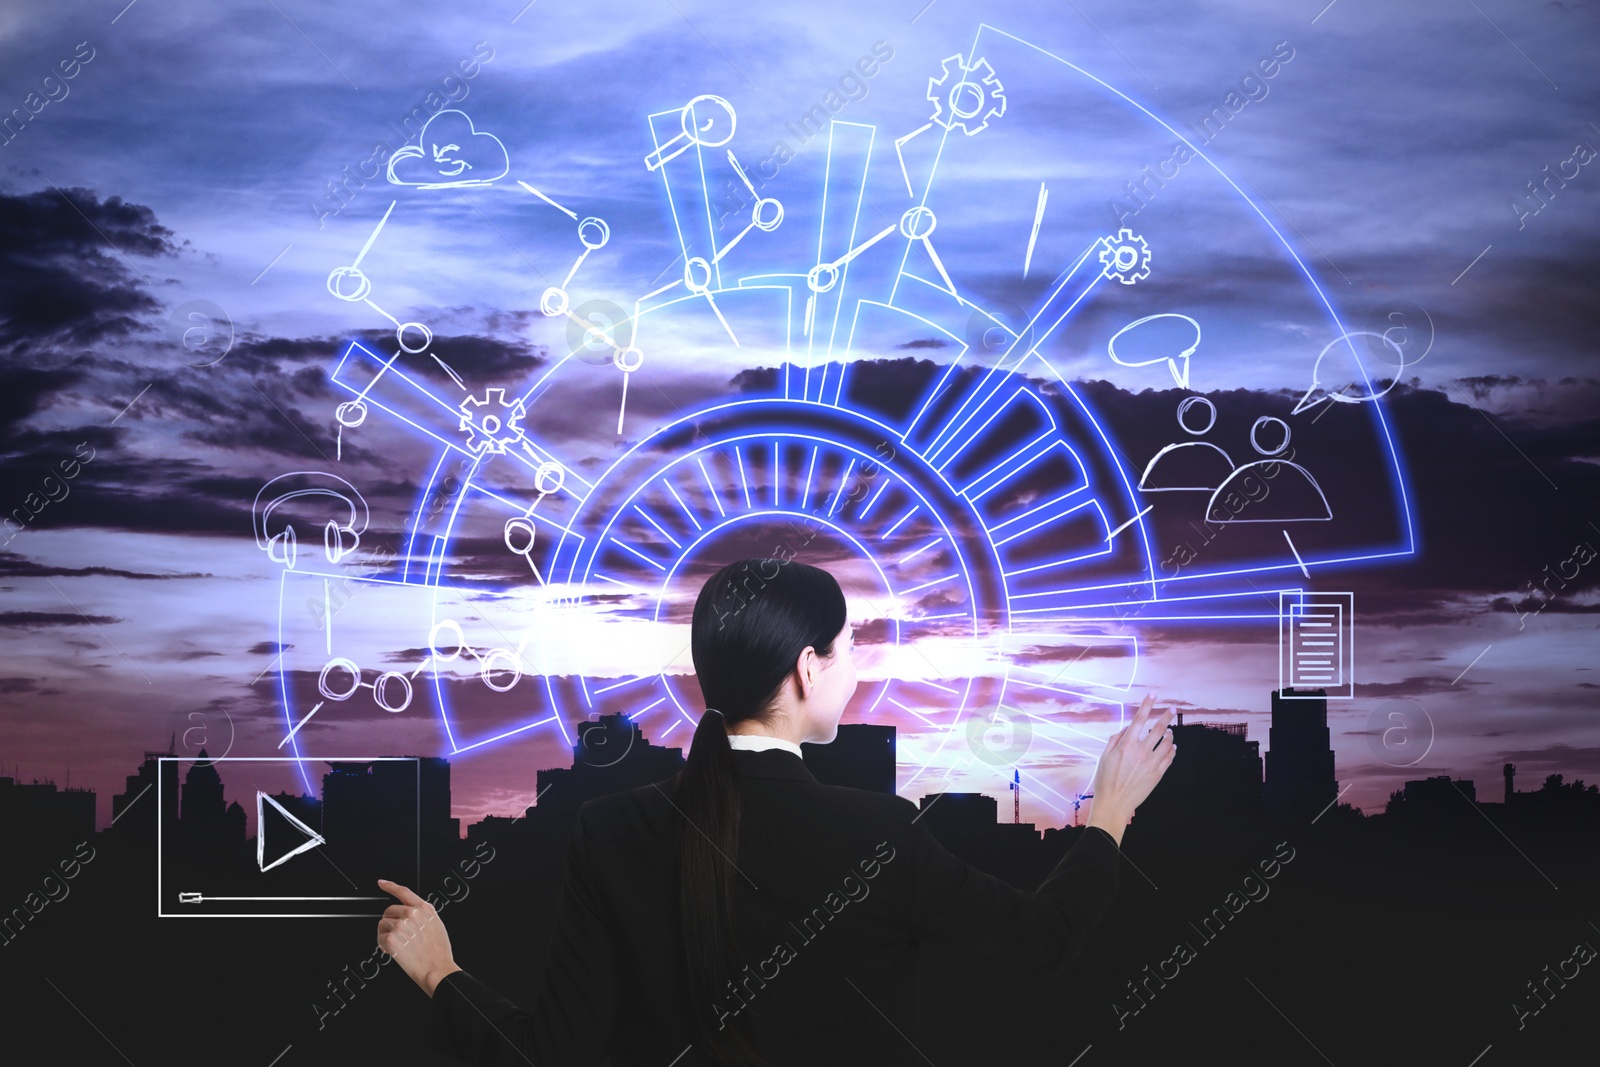 Image of Young businesswoman and network schemes against silhouette of city. Cloud technology 